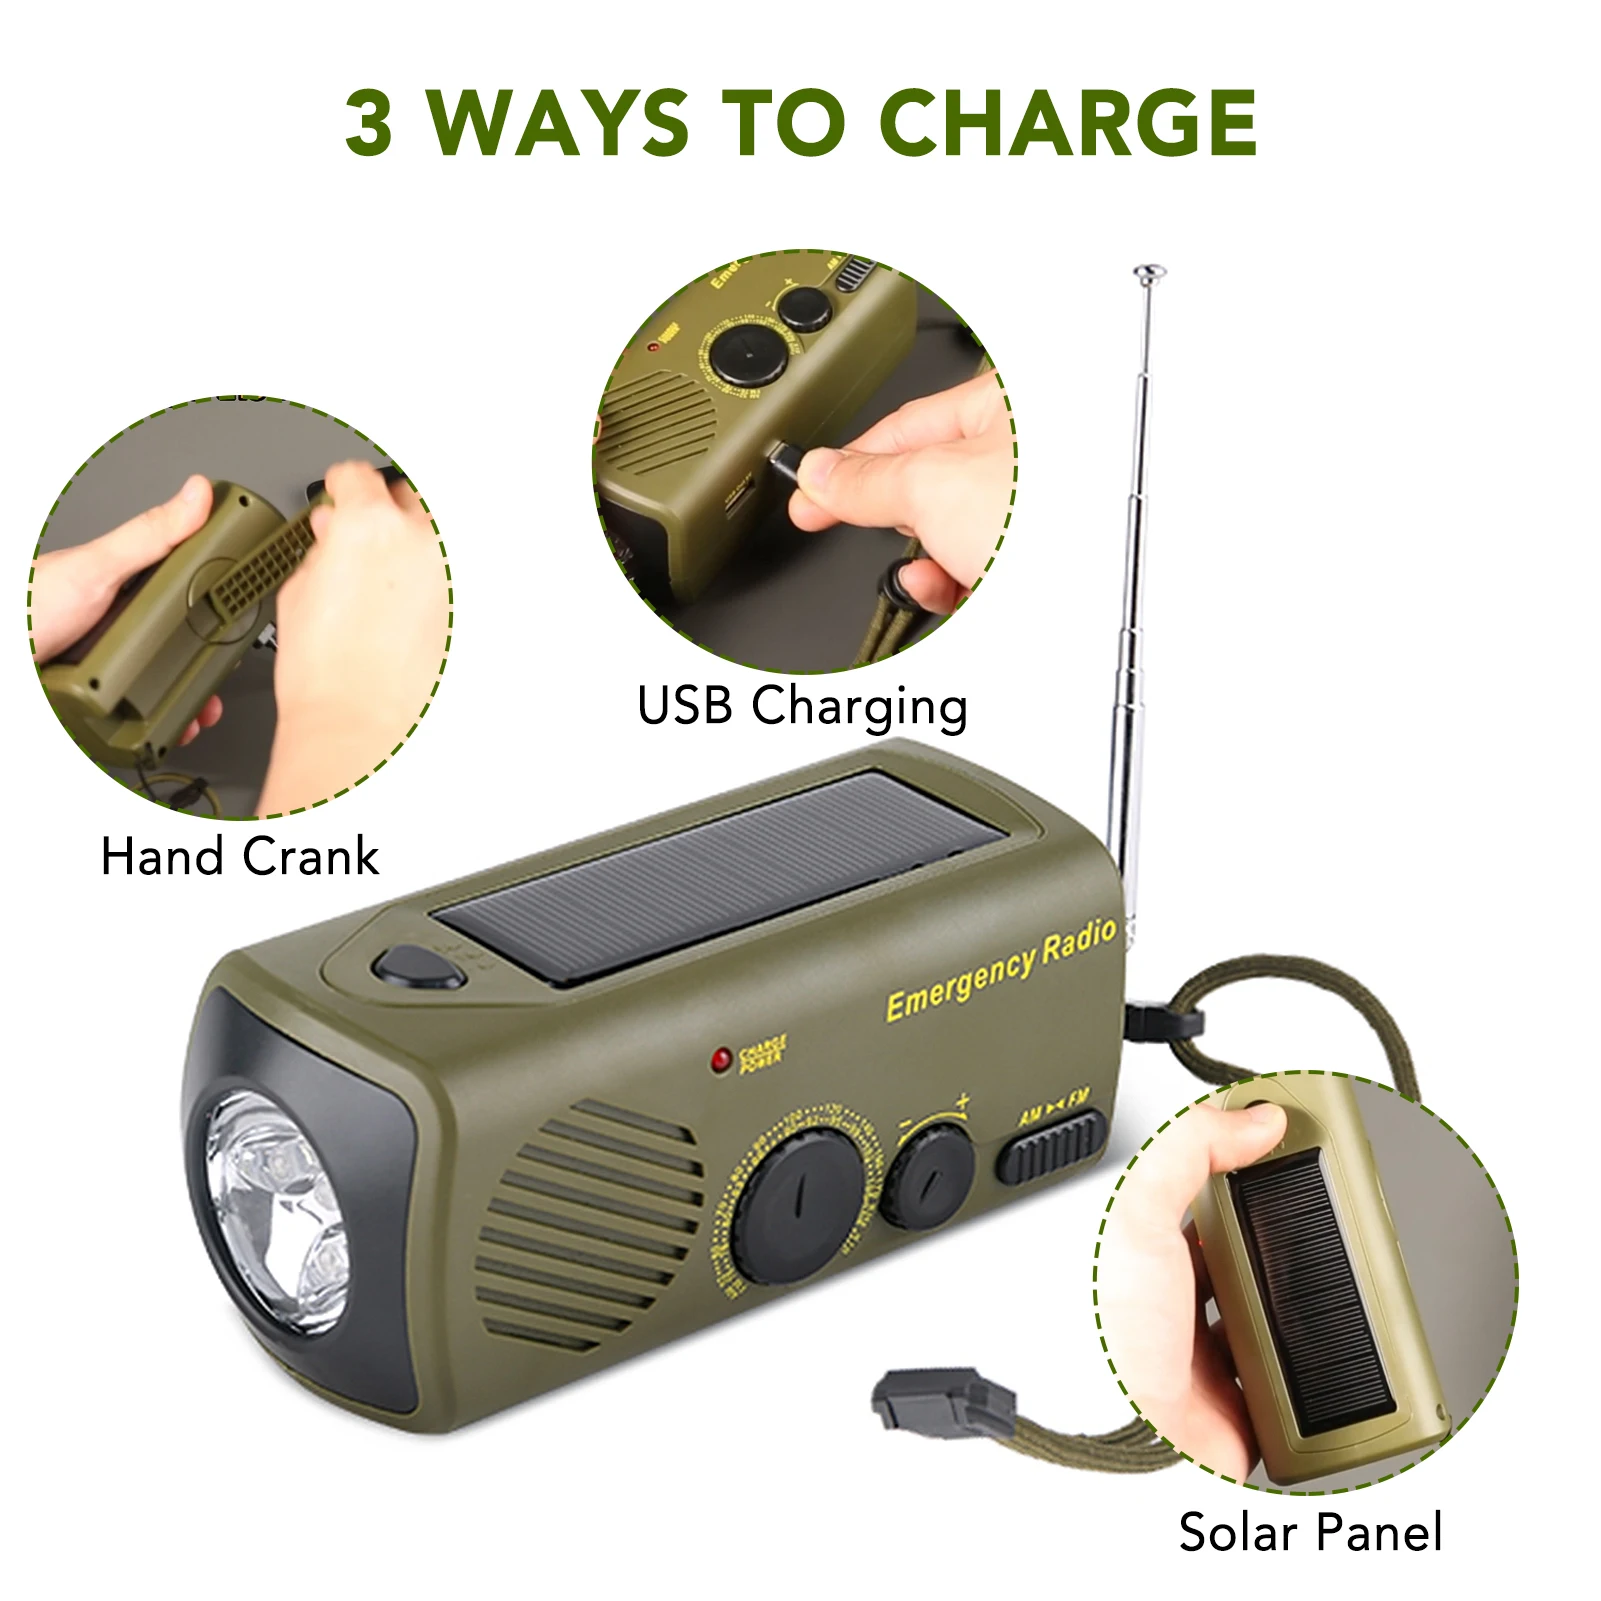 Outdoor Emergency Radio Solar Charging Hand Crank USB Rechargeable Radio with Flashlight SOS Alarm AM/FM Cell Phone Charger